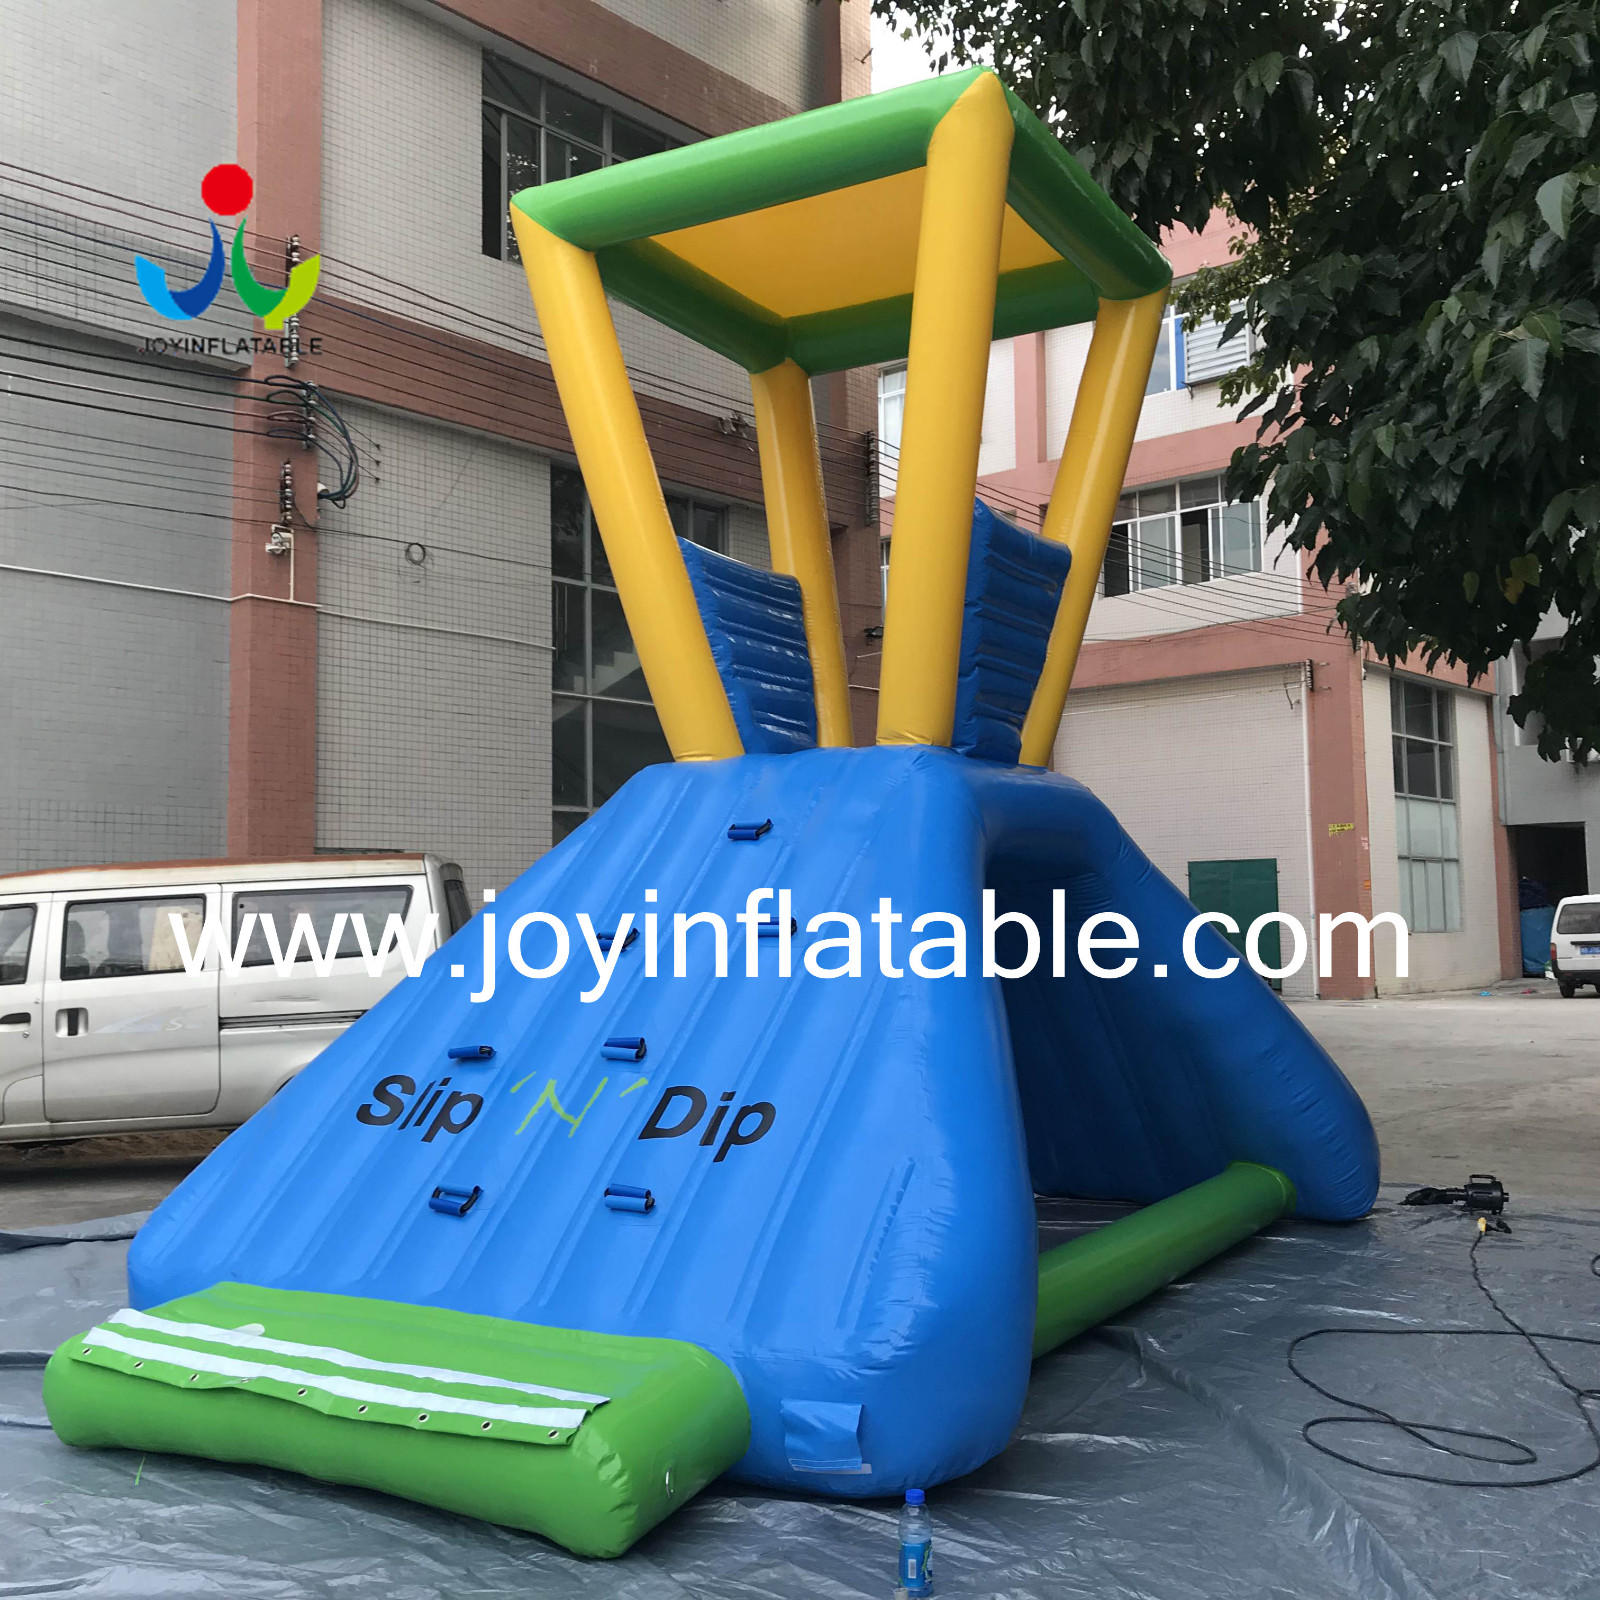 fun lake inflatables inflatable parkdesign for outdoor